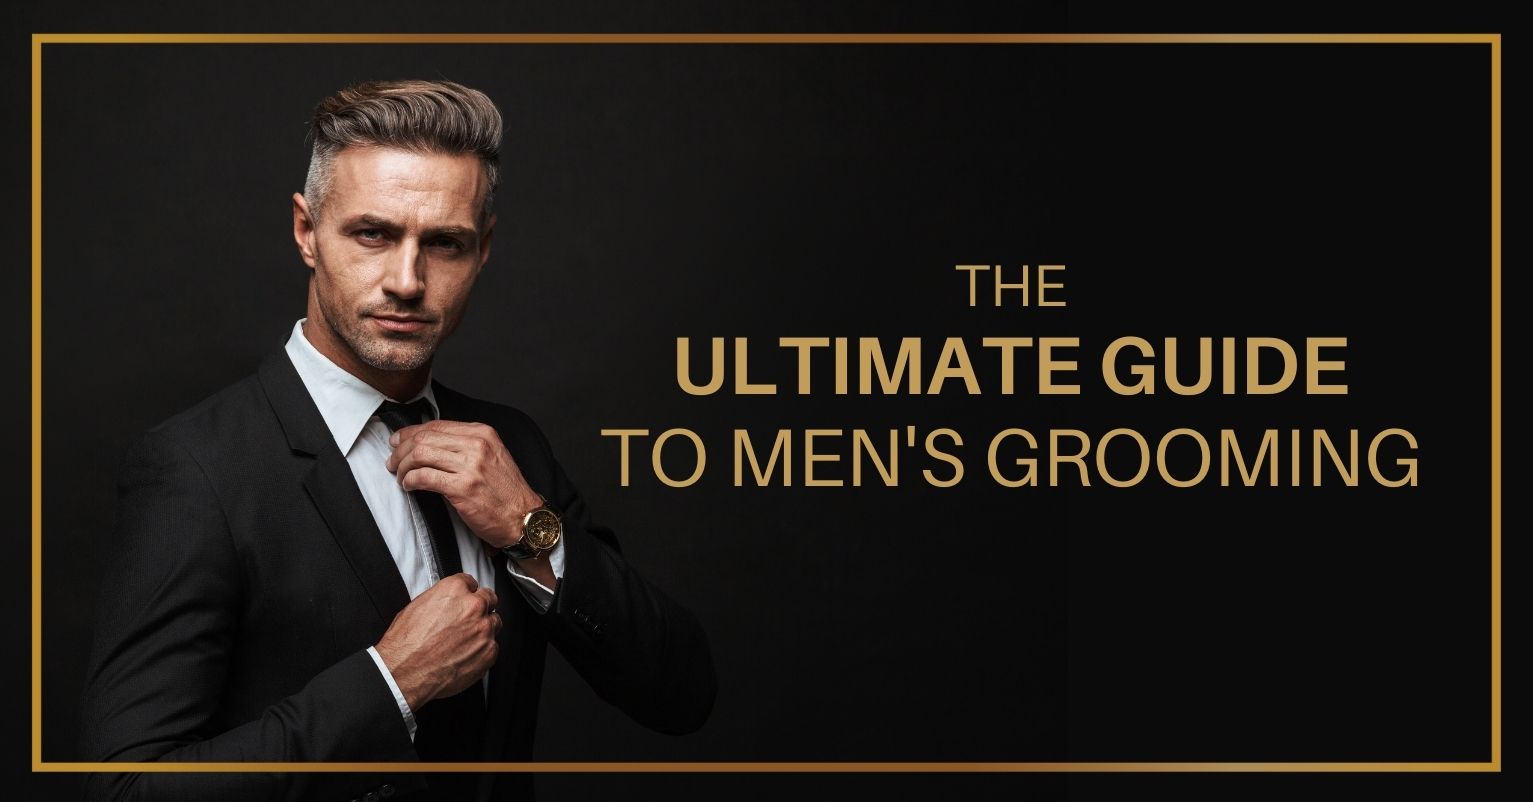 The Ultimate Guide To Men's Grooming